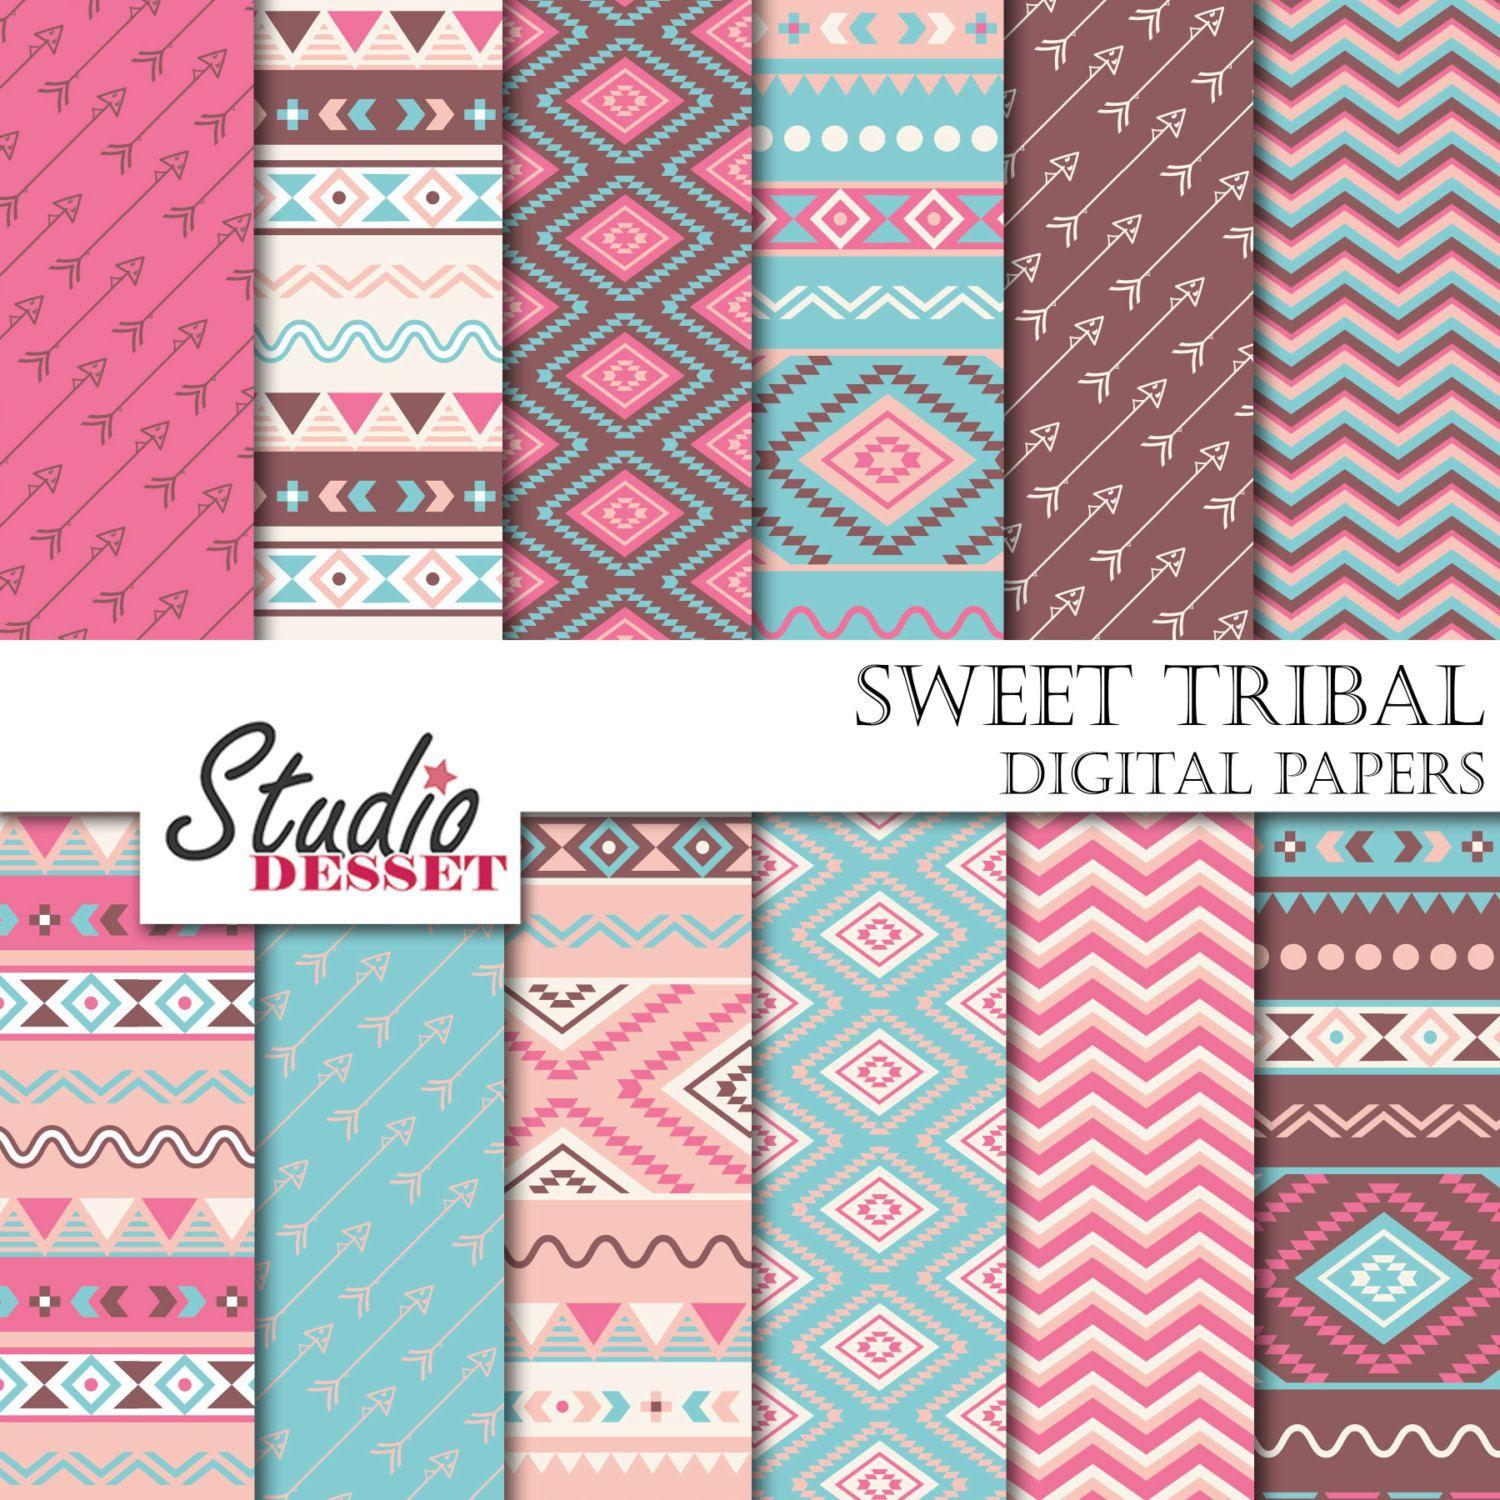 Sweet Tribal Paper, Ethnic Patterns in Baby Blue and Pink, Aztec